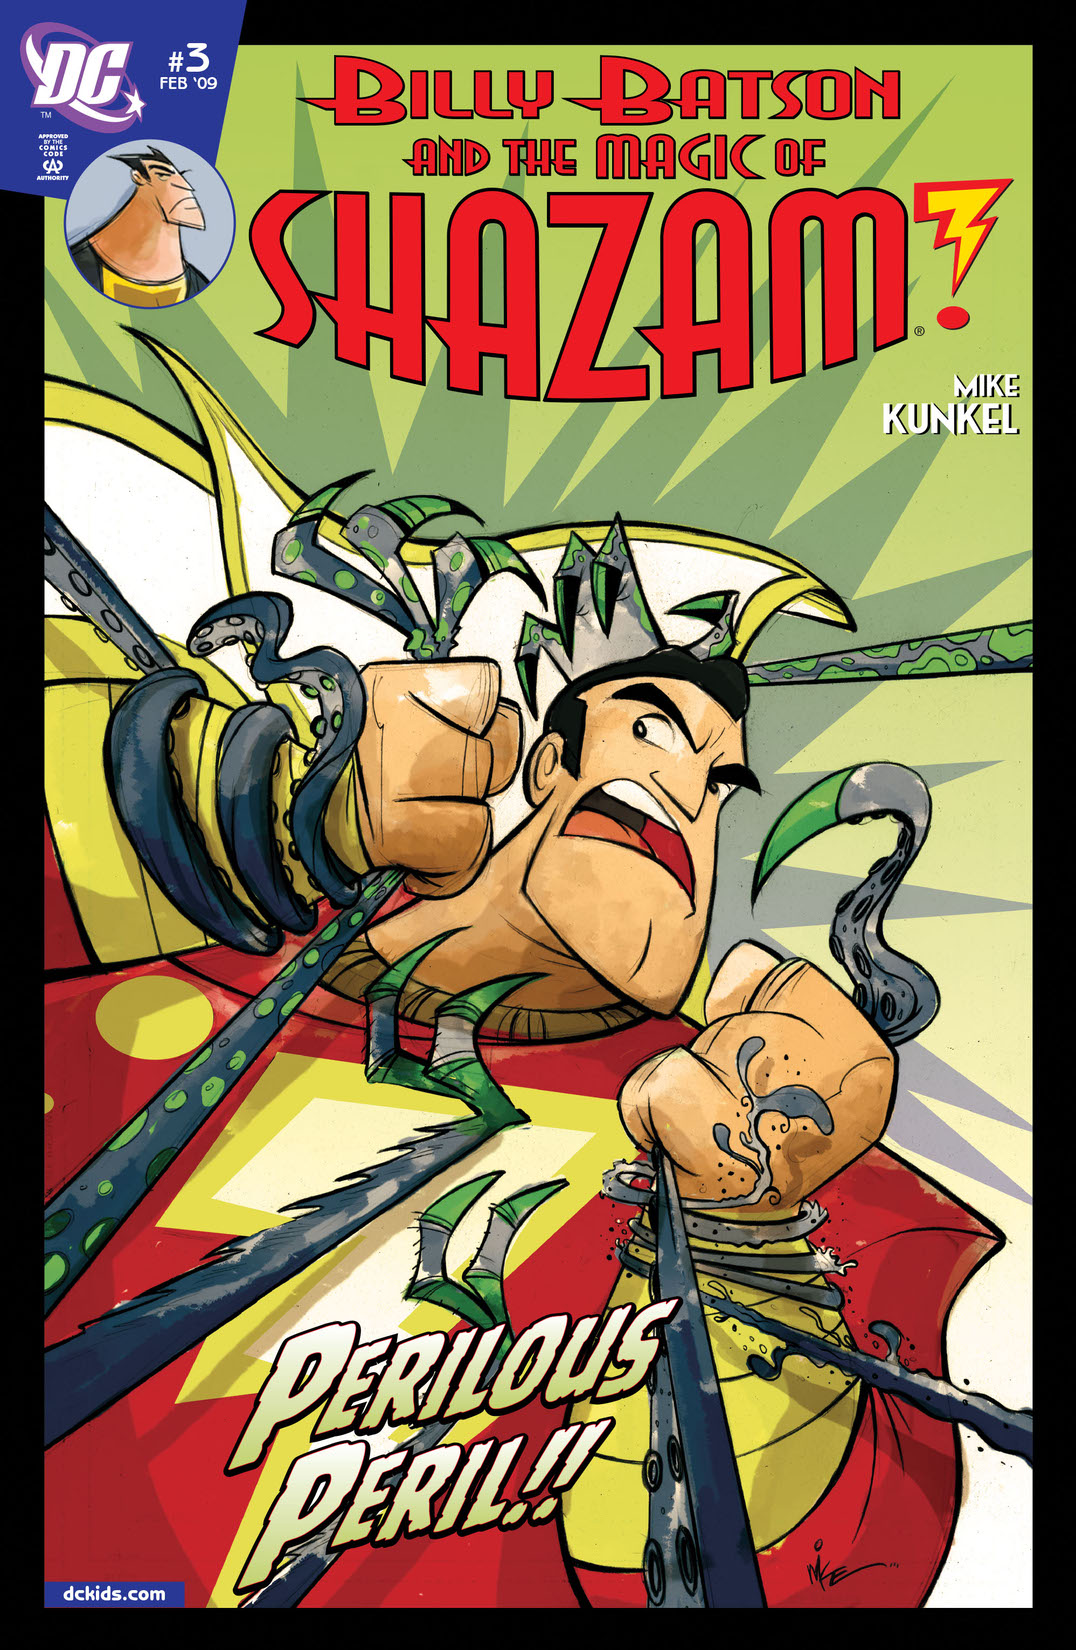 Billy Batson & the Magic of Shazam! #3 preview images